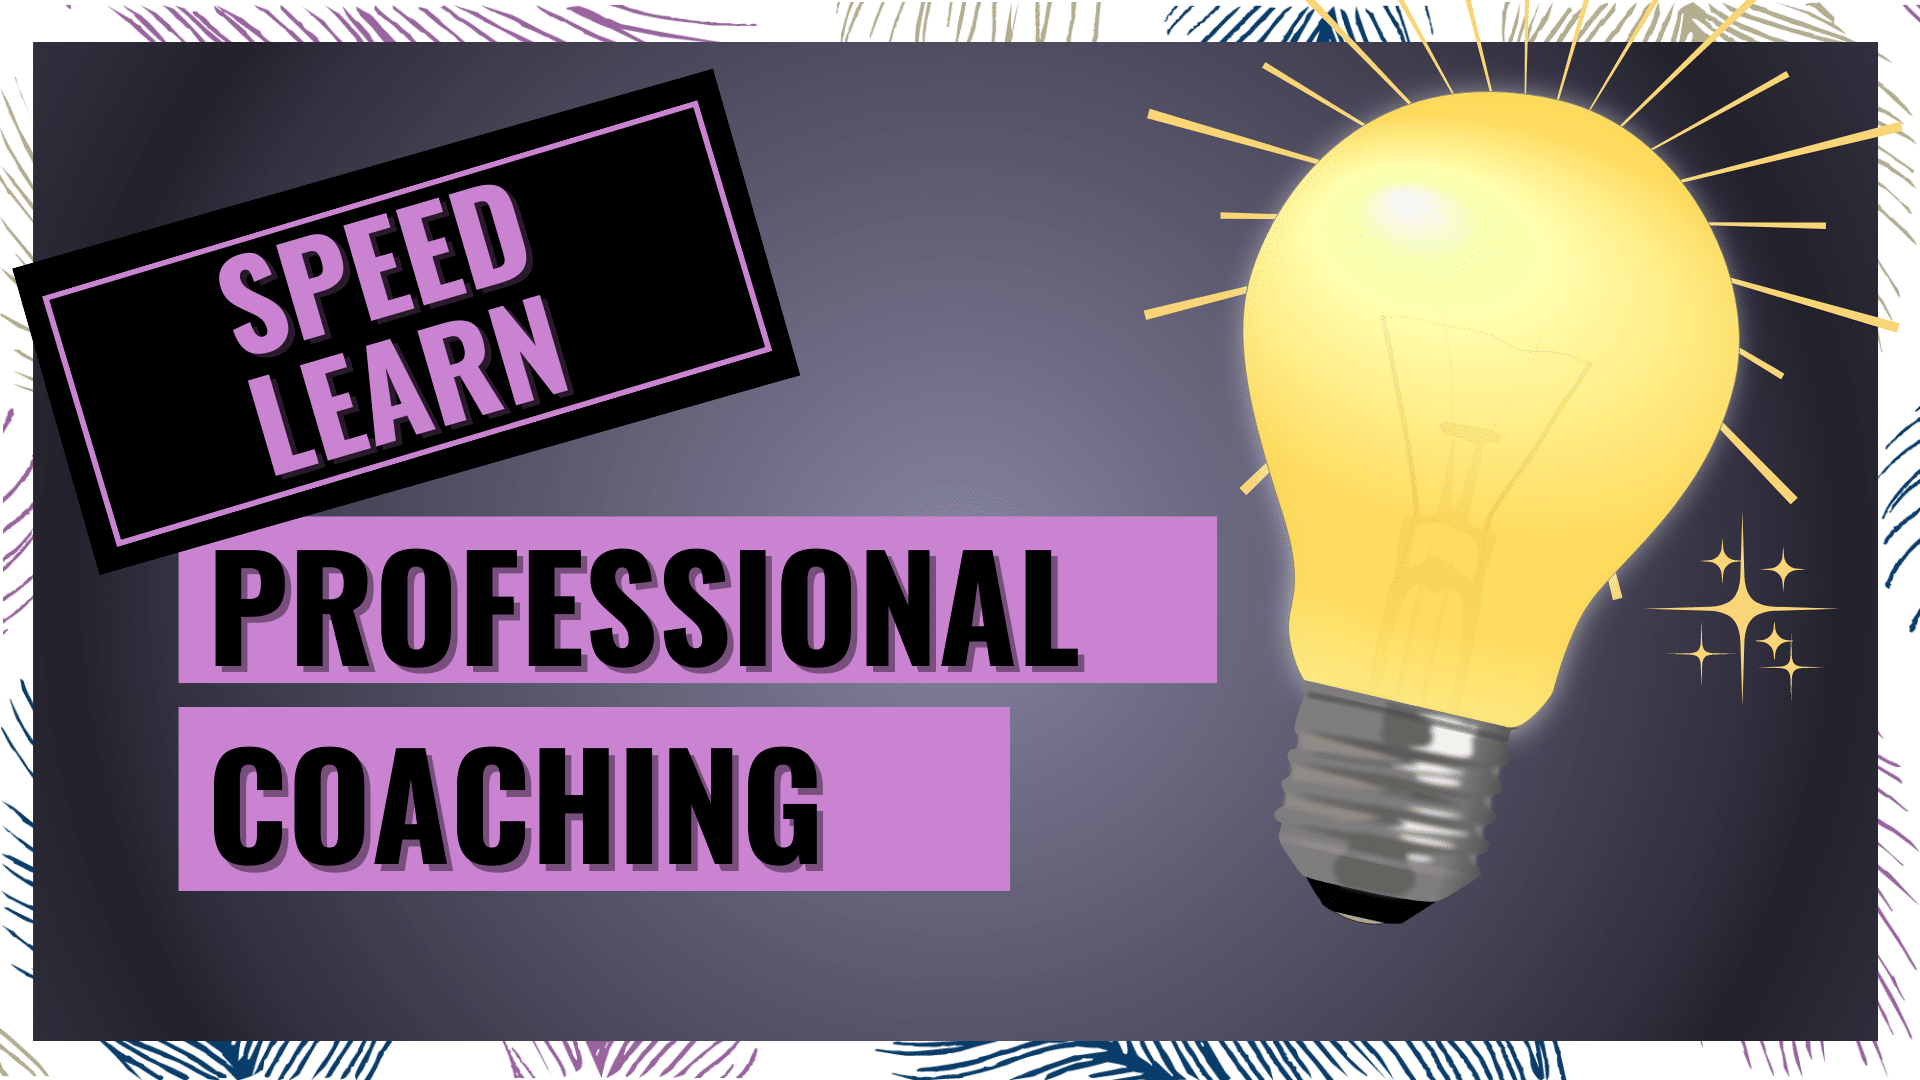 Speed Learn - Professional Coaching